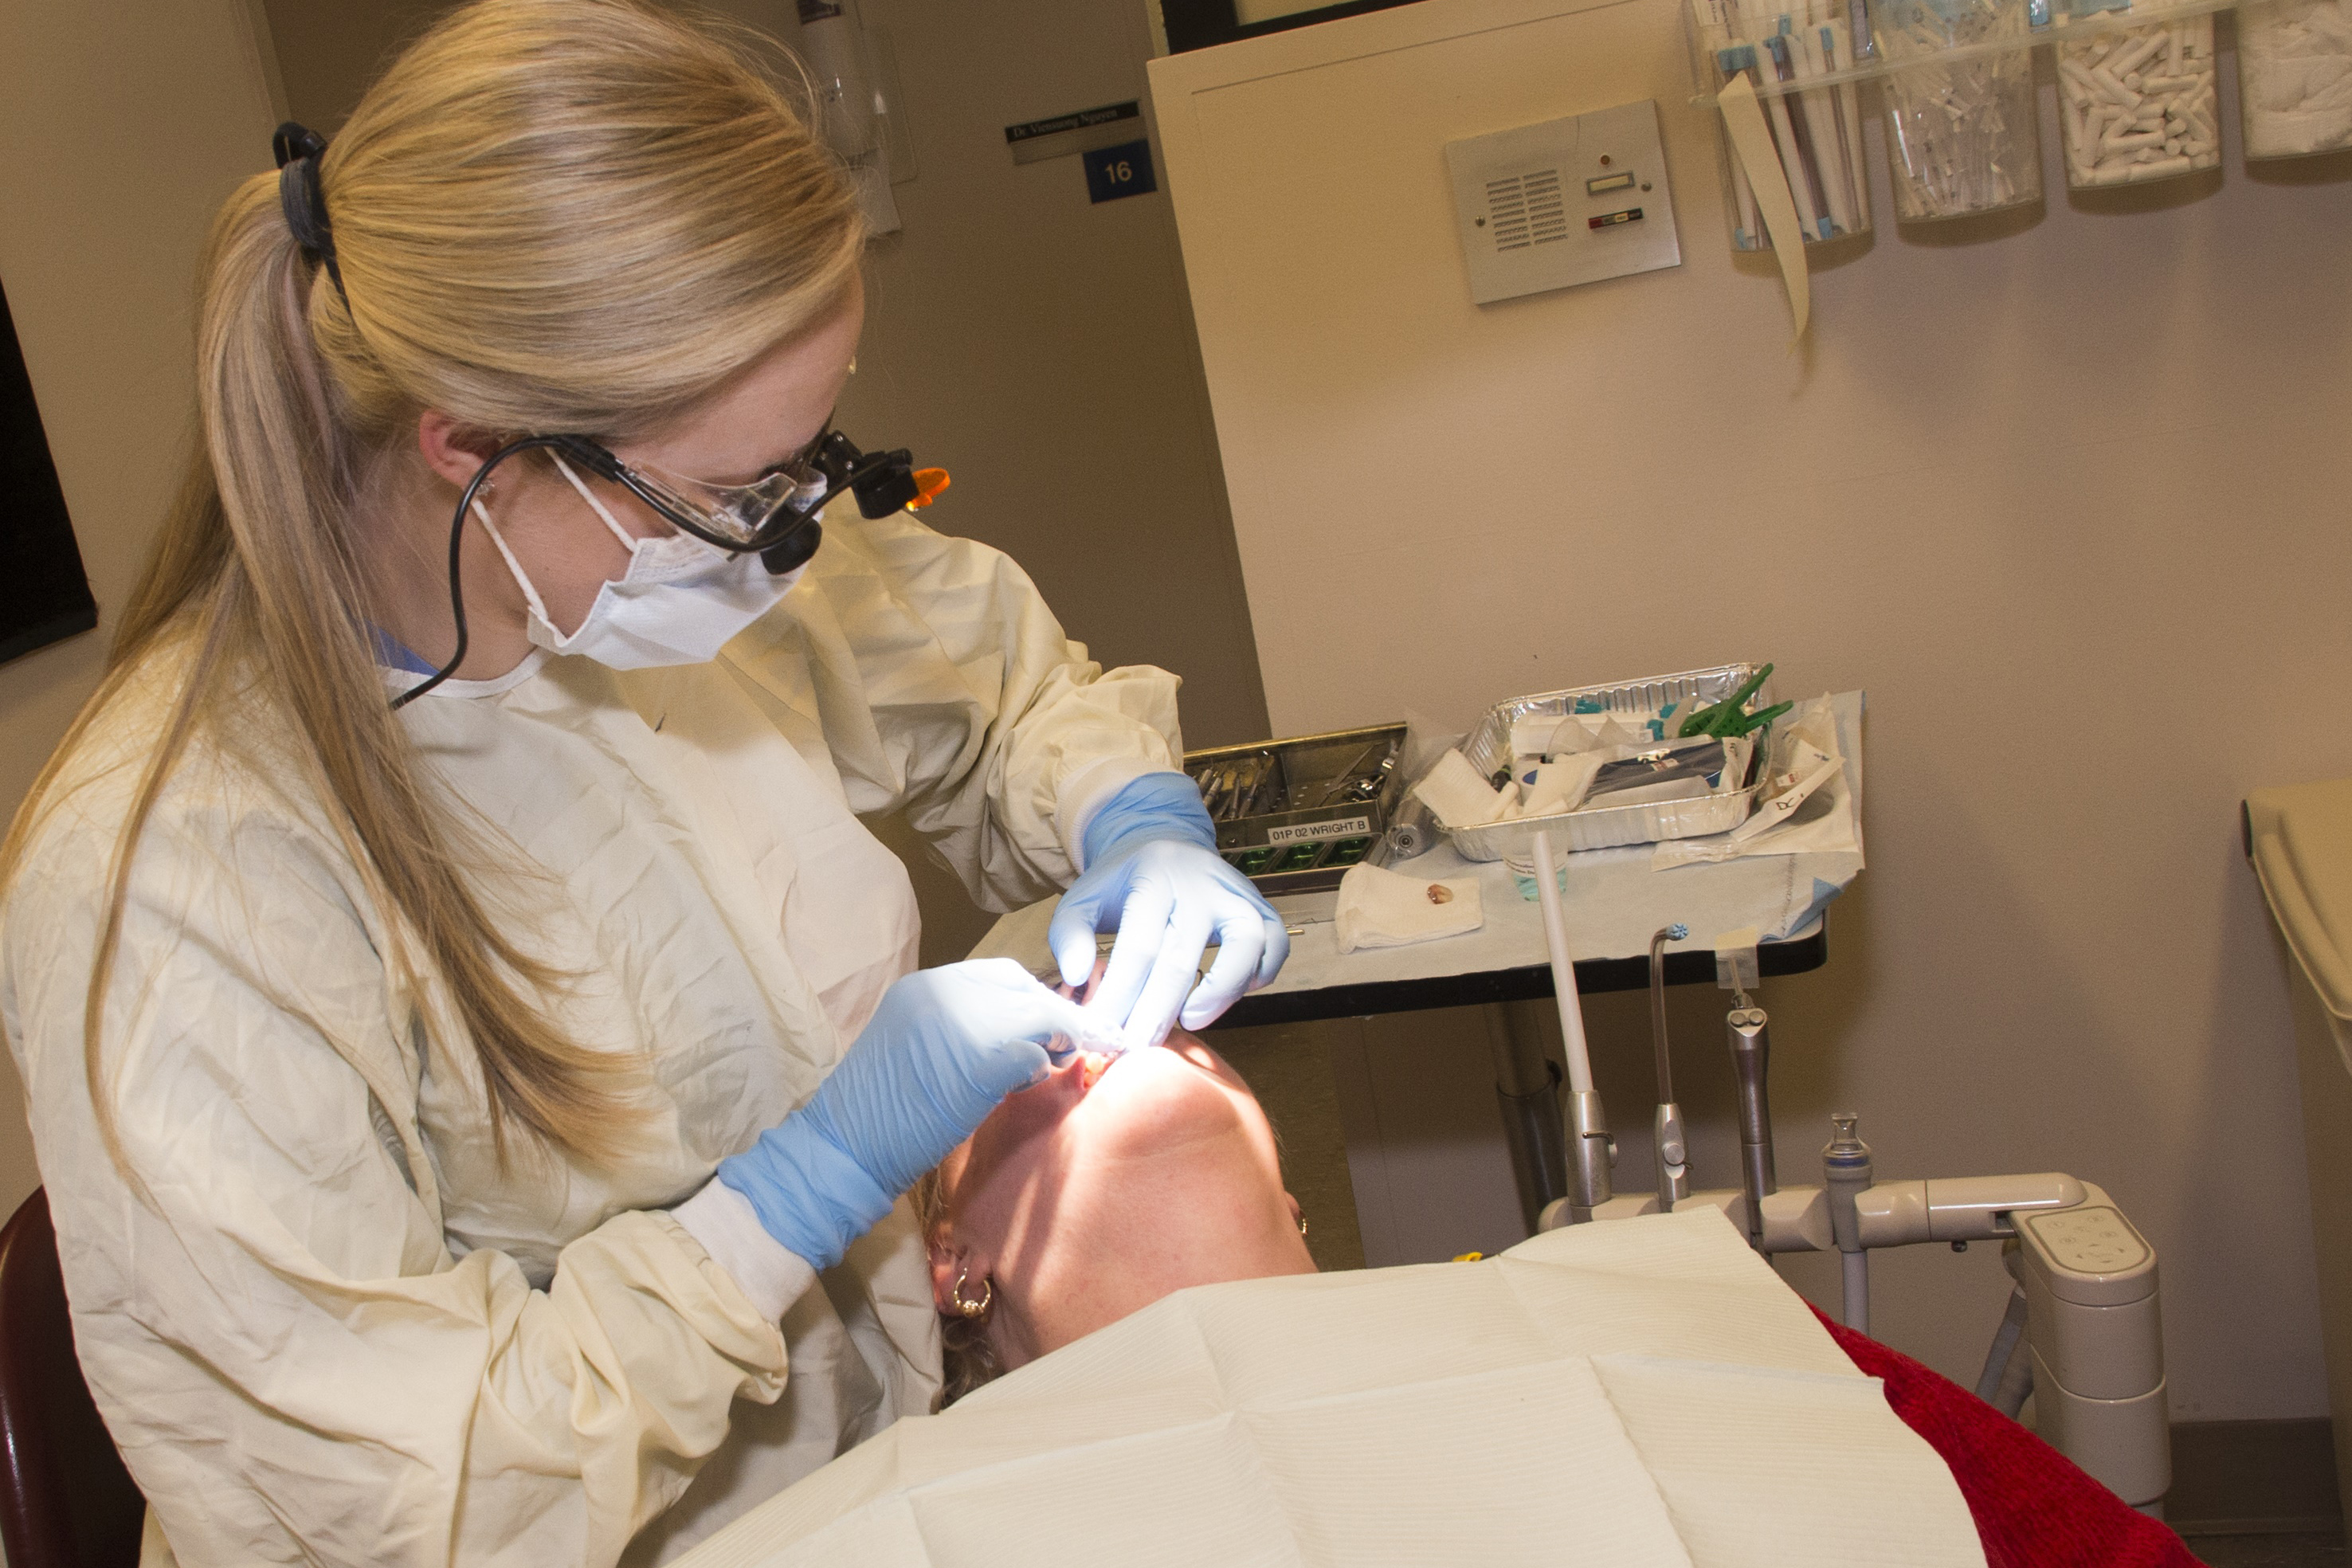 Dental resident Roberta Wright tends to a patient. (Janine Gelineau/UConn Health Photo)